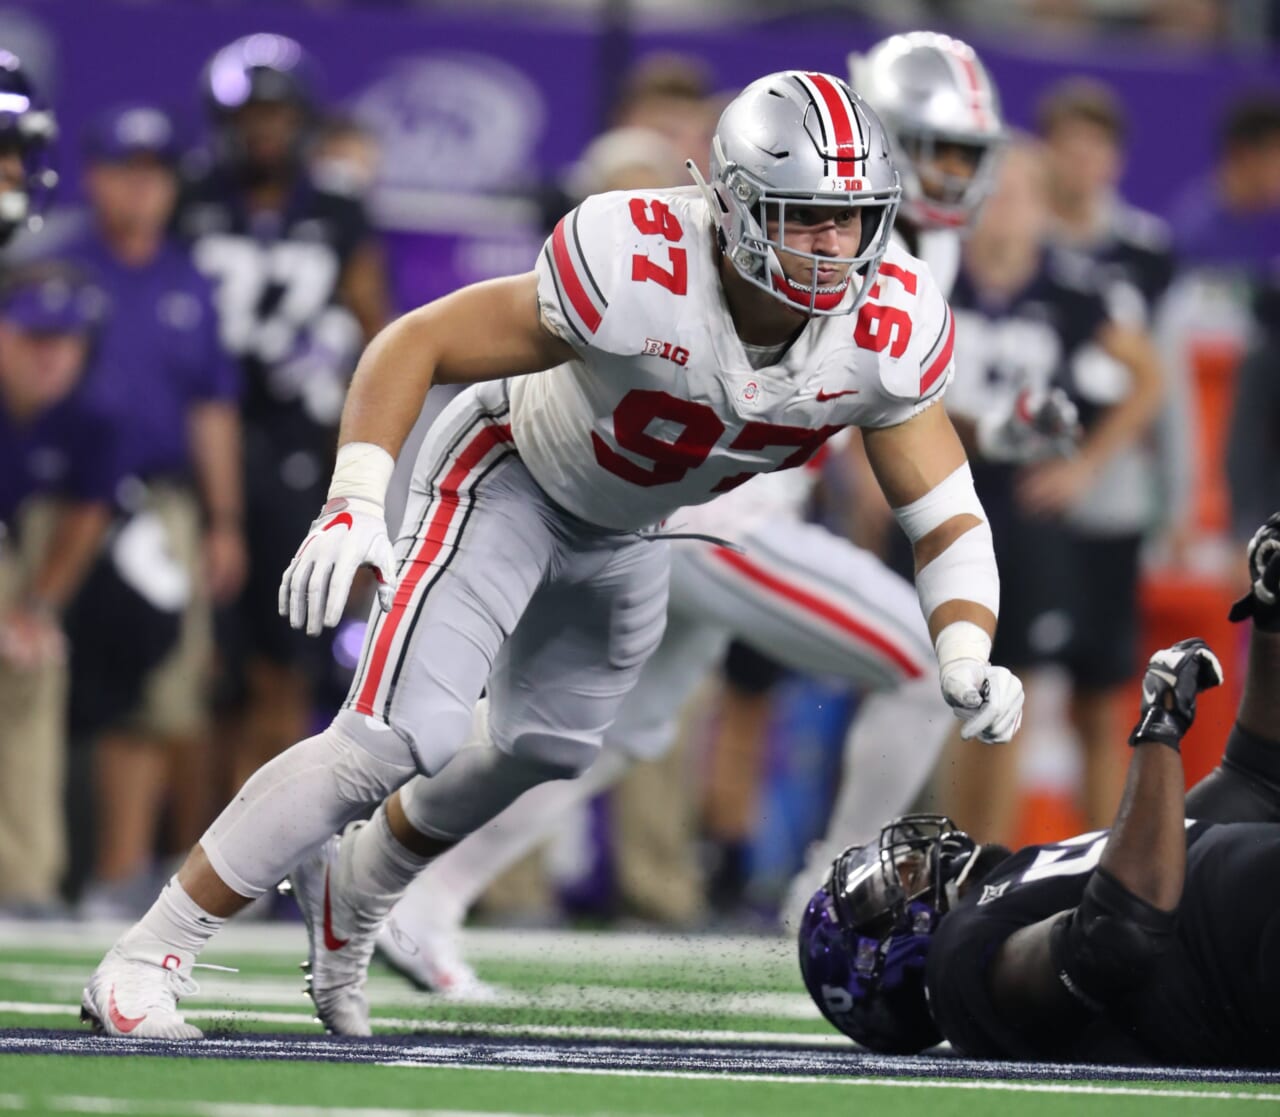 What Nick Bosa Offers The New York Giants If He Somehow Falls To No. 6